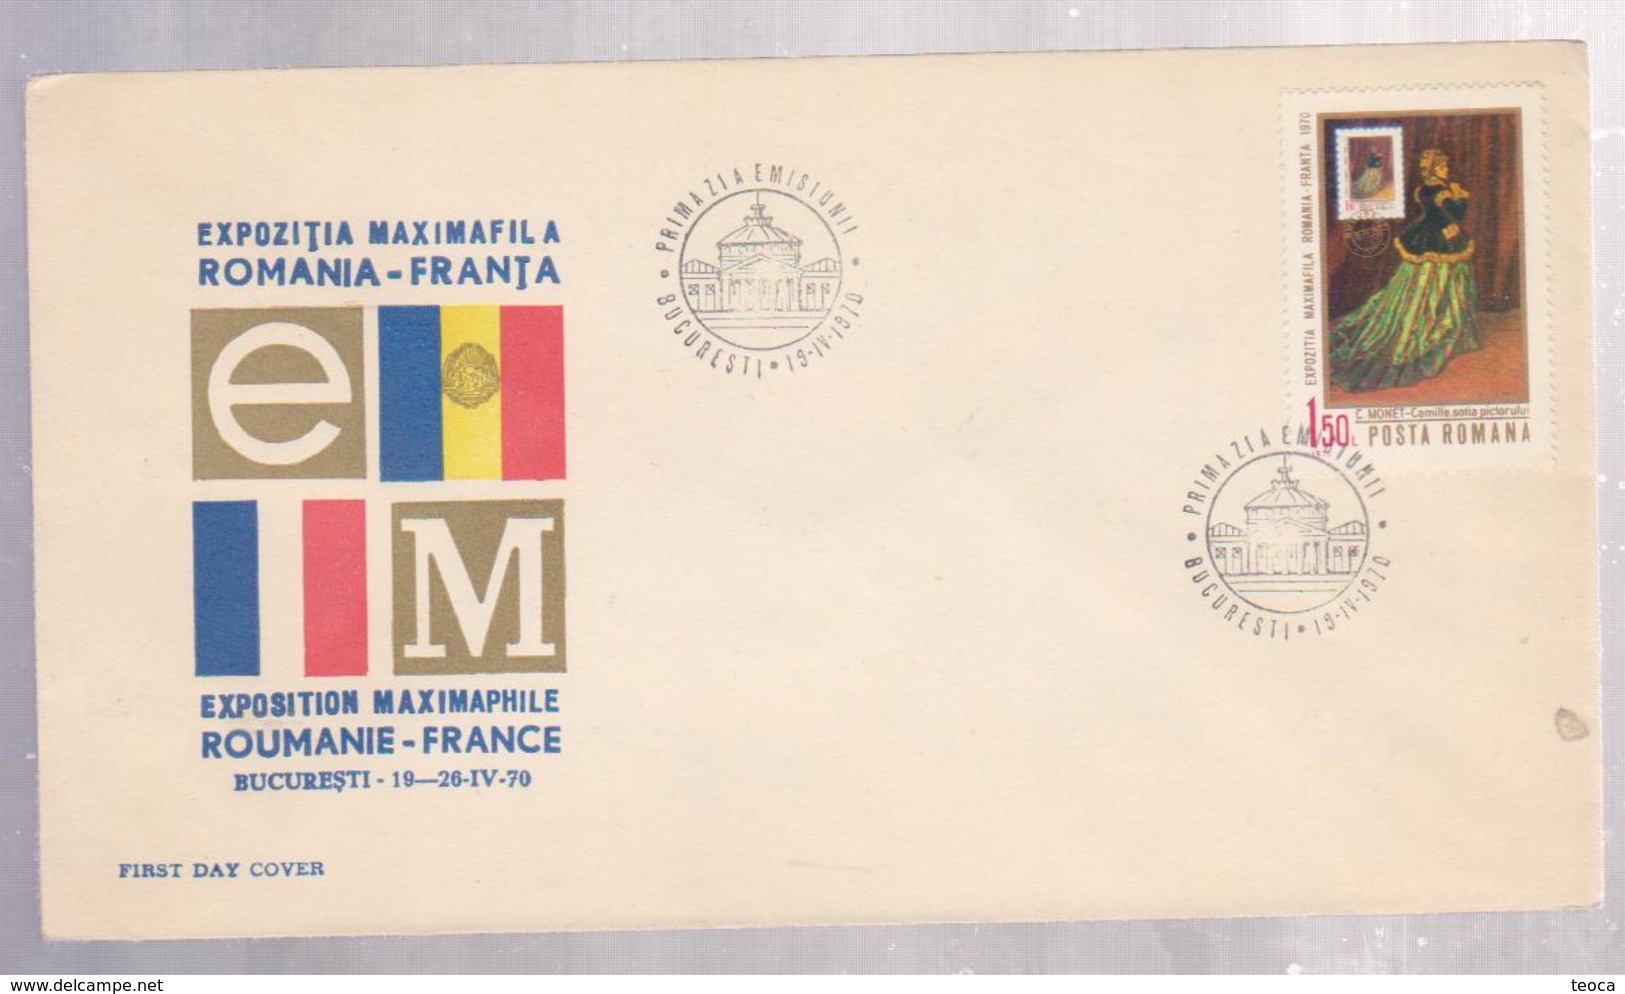 PHILATELY EXPOSITION MAXIMAPHILE, ROMANIAN-FRANCE, FLAGS, FDC, 1970, ROMANIA - FDC